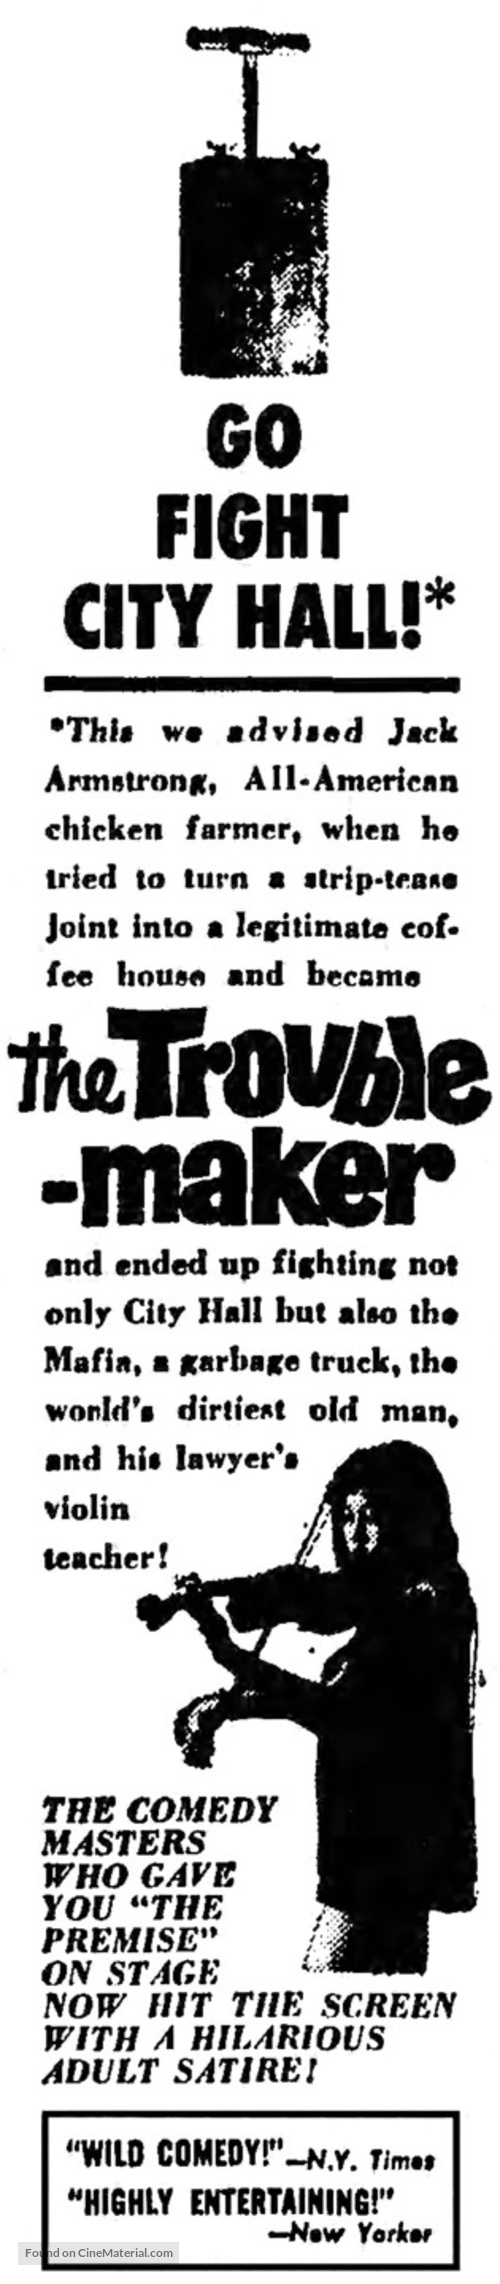 The Troublemaker - poster